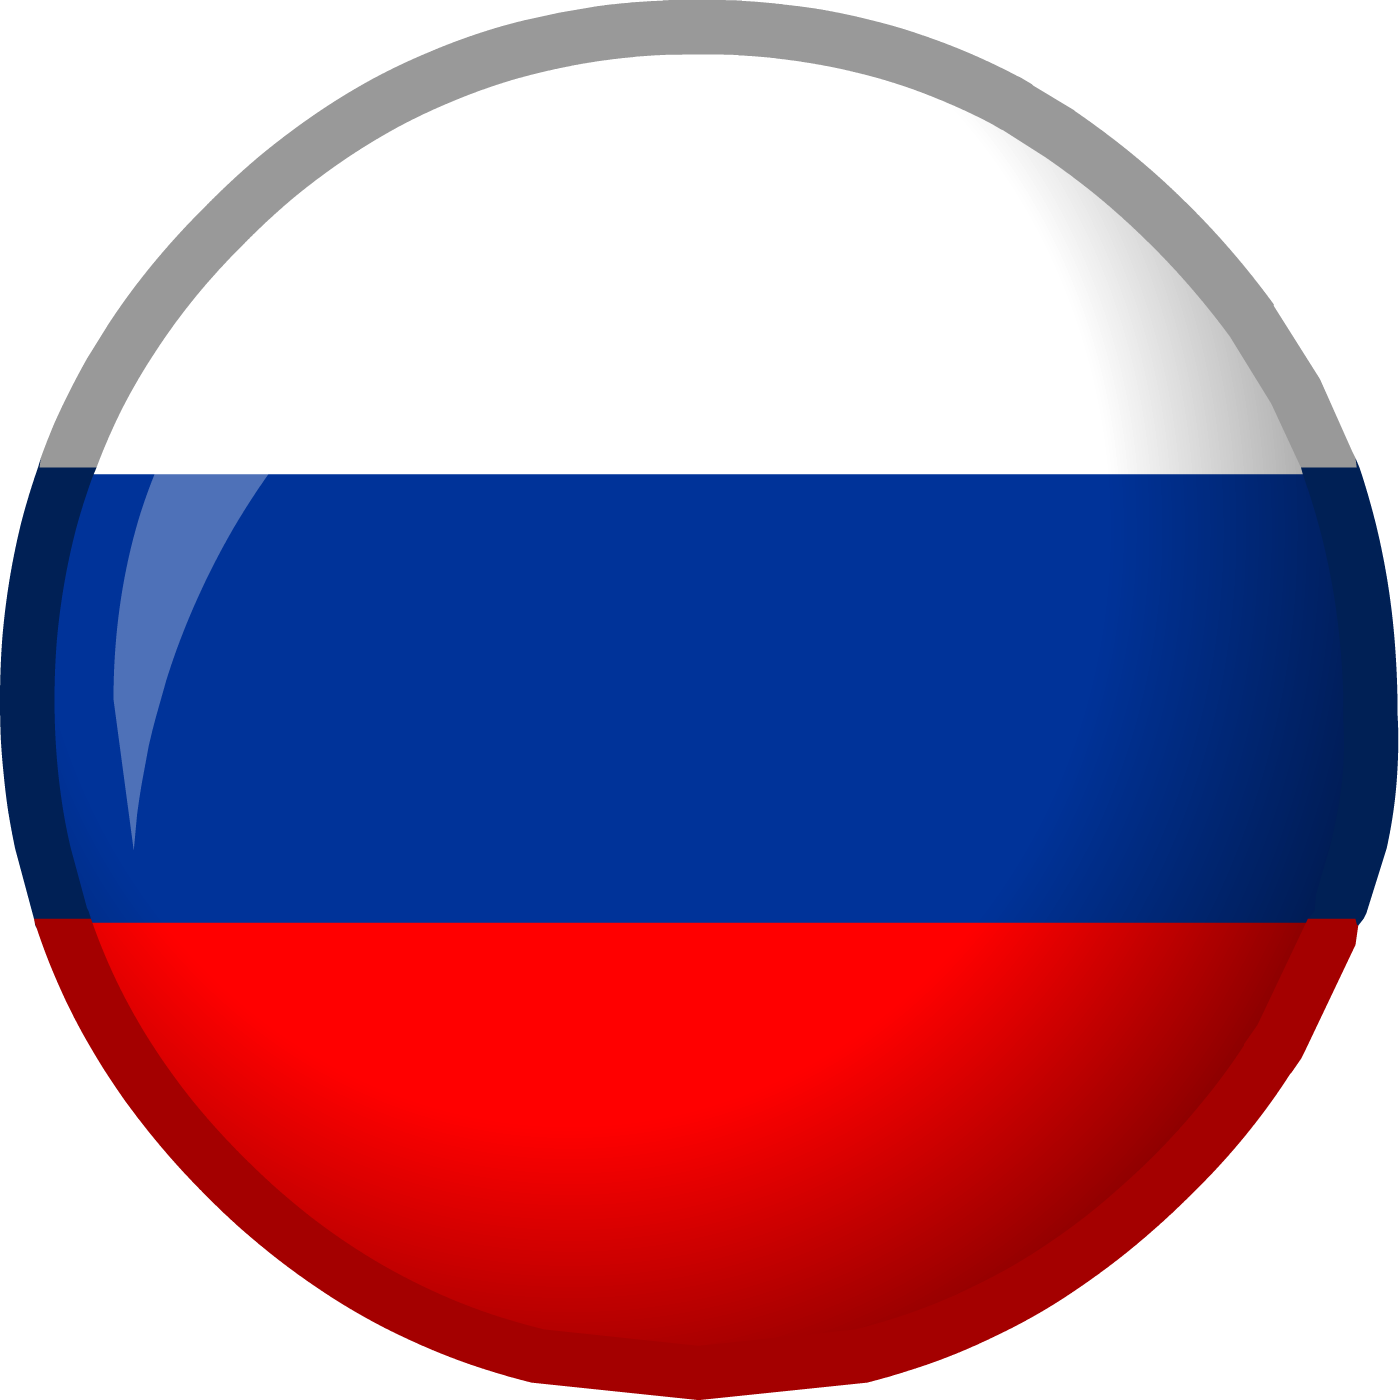 Archivo:Rusia.png | Club Penguin Wiki | Fandom powered by Wikia